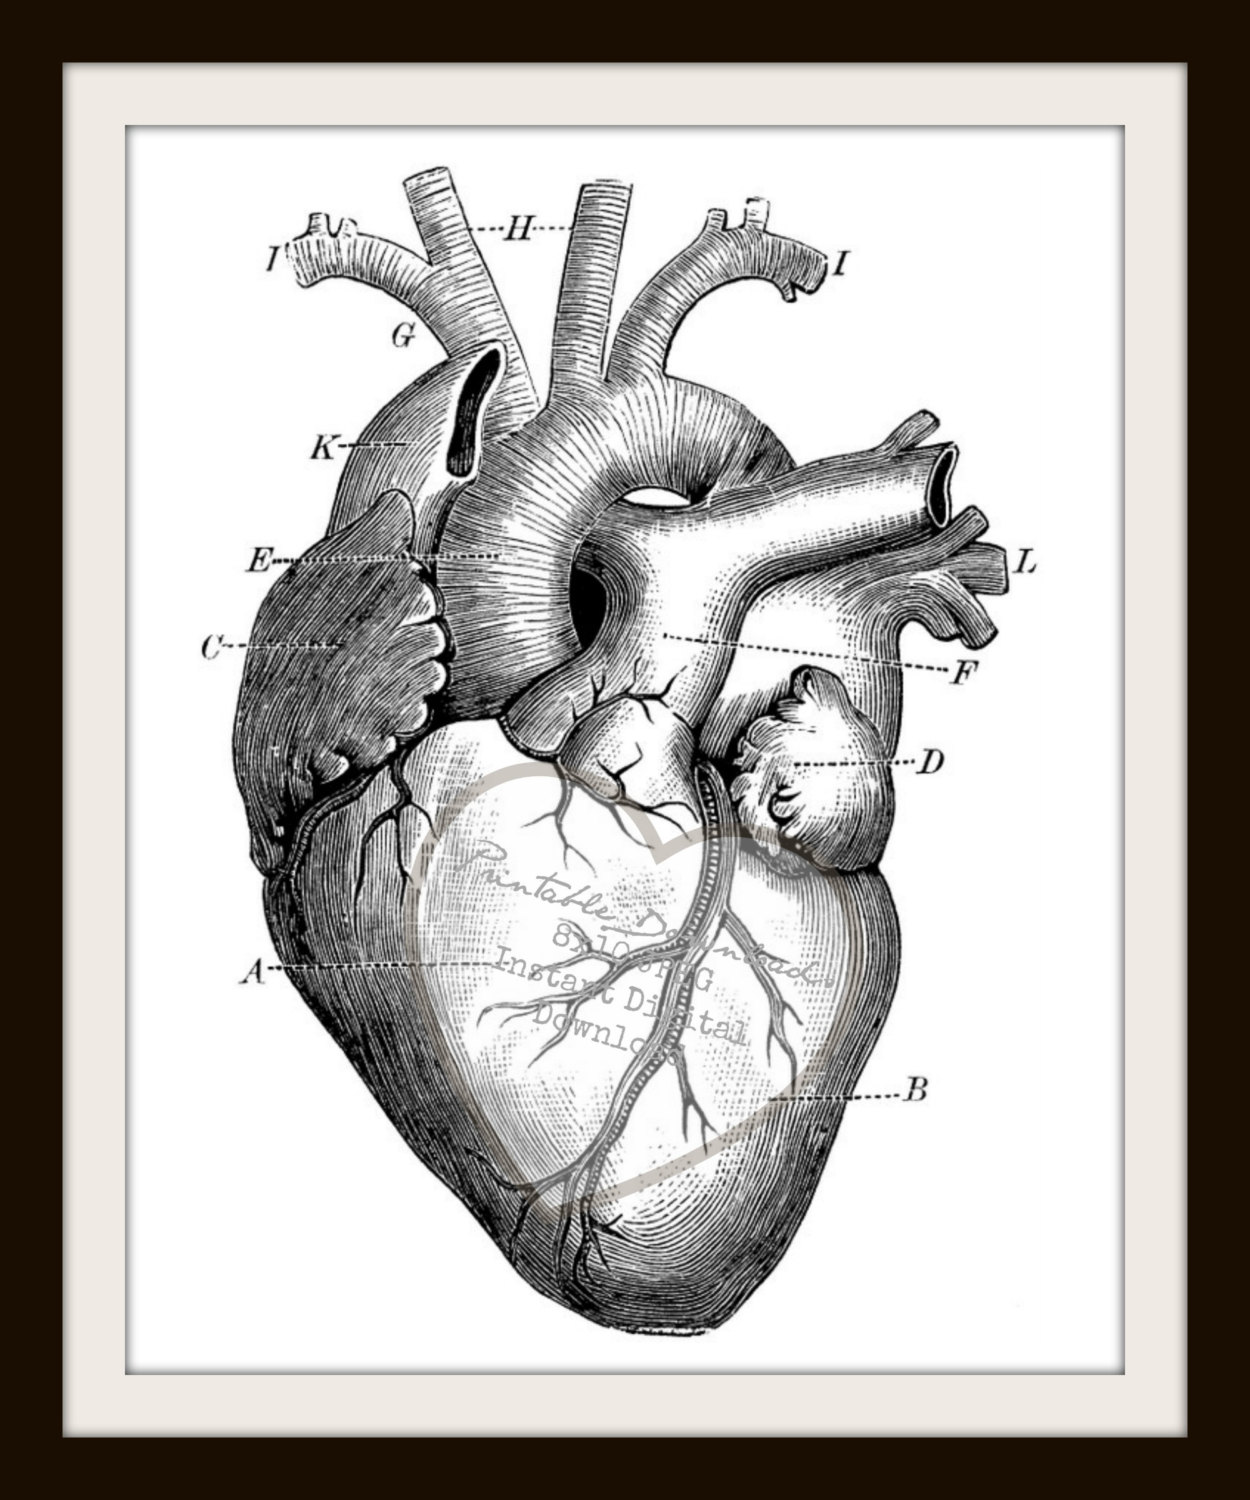 Popular items for heart anatomy on Etsy